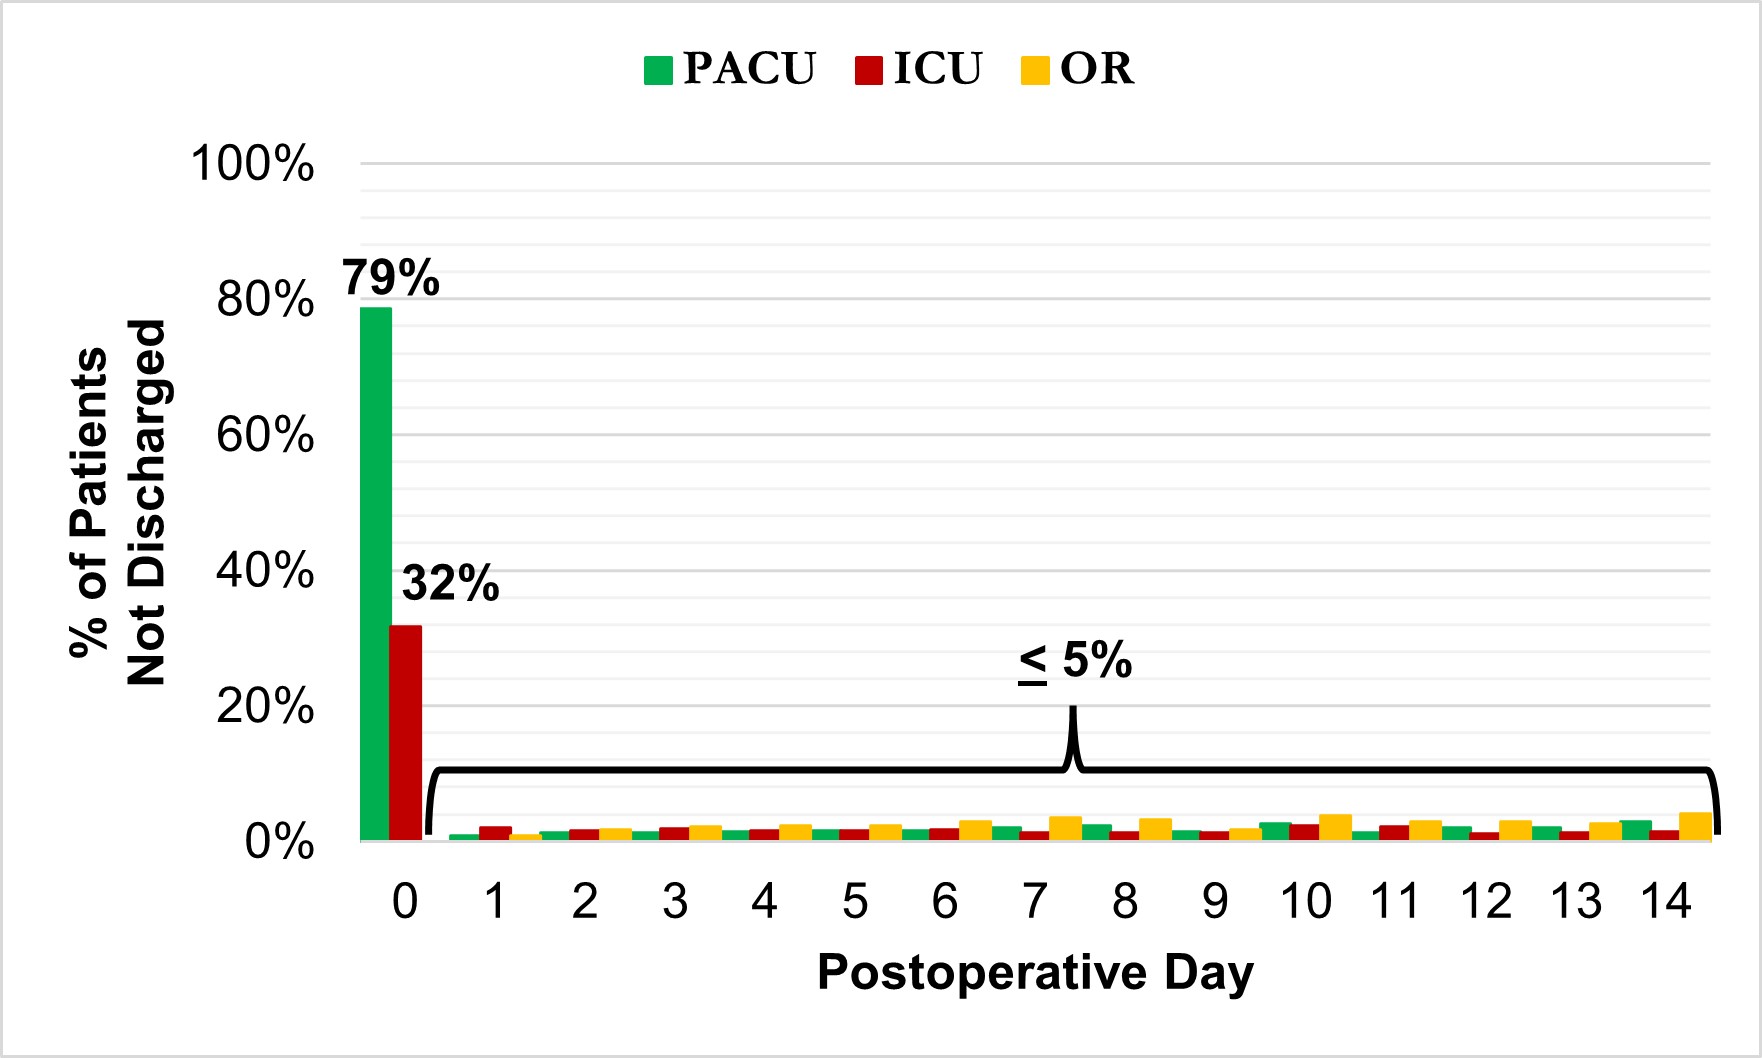 Figure 1. Proportion of Patients Visiting an ICU, PACU, or Returning to the OR for Each Postoperative Day